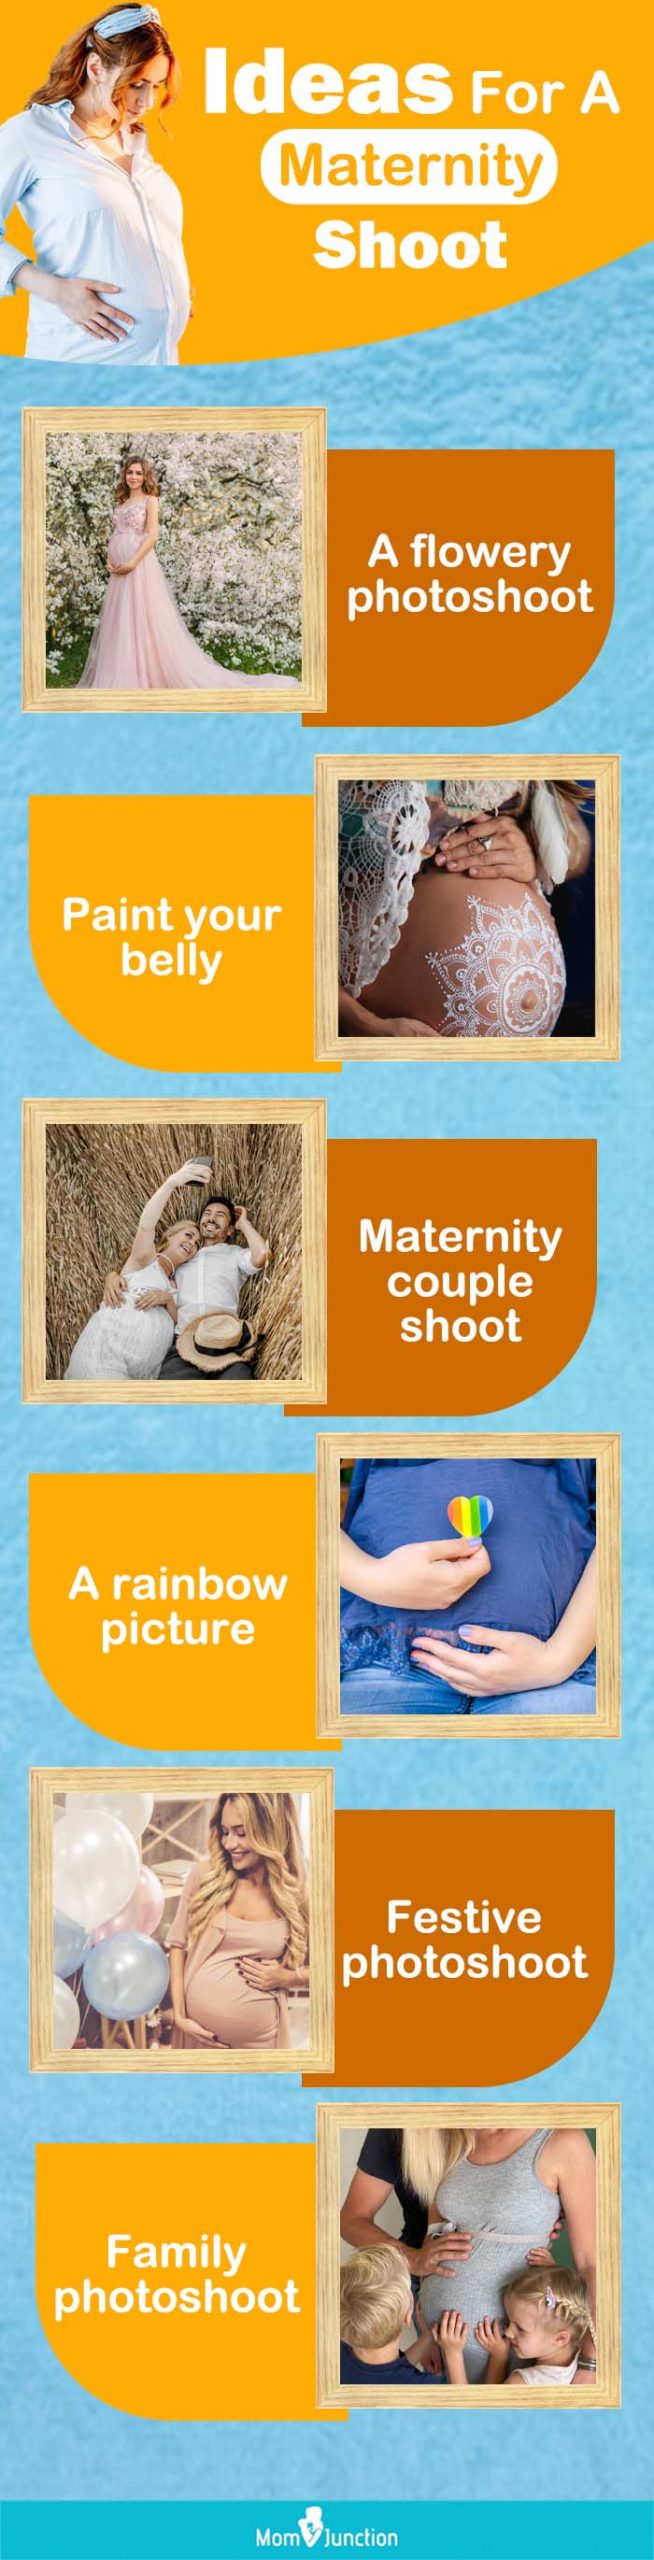 ideas for a maternity shoot [infographic]